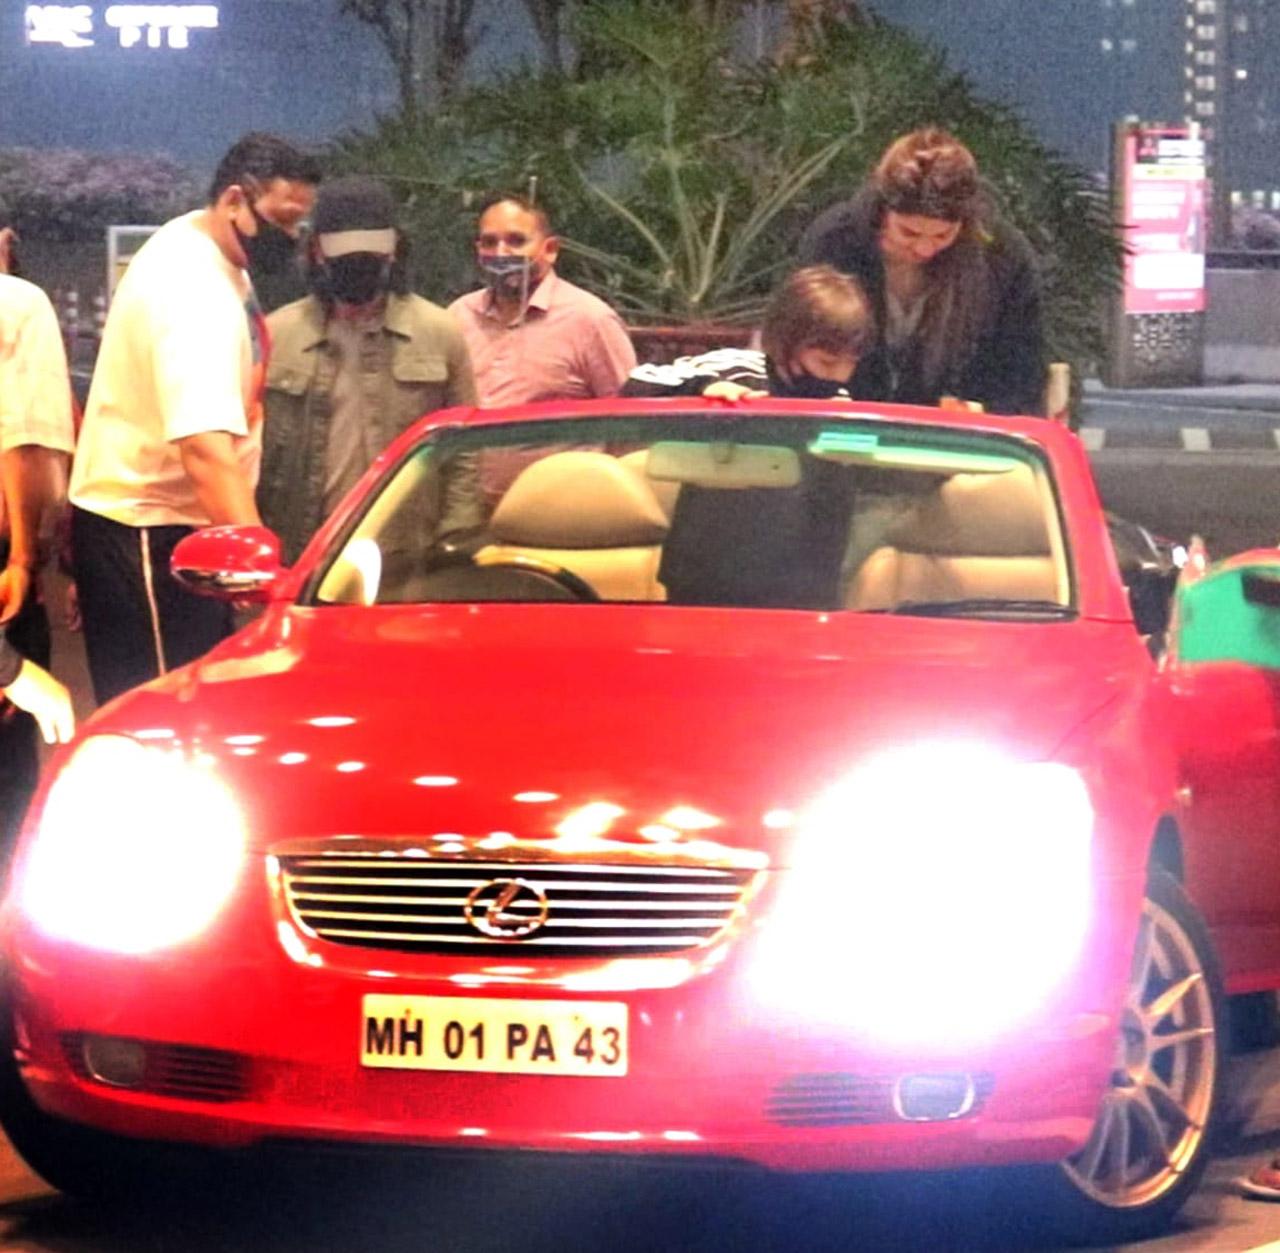 What caught everyone's attention other than Shah Rukh Khan and his family's presence at the airport was his swanky red car.